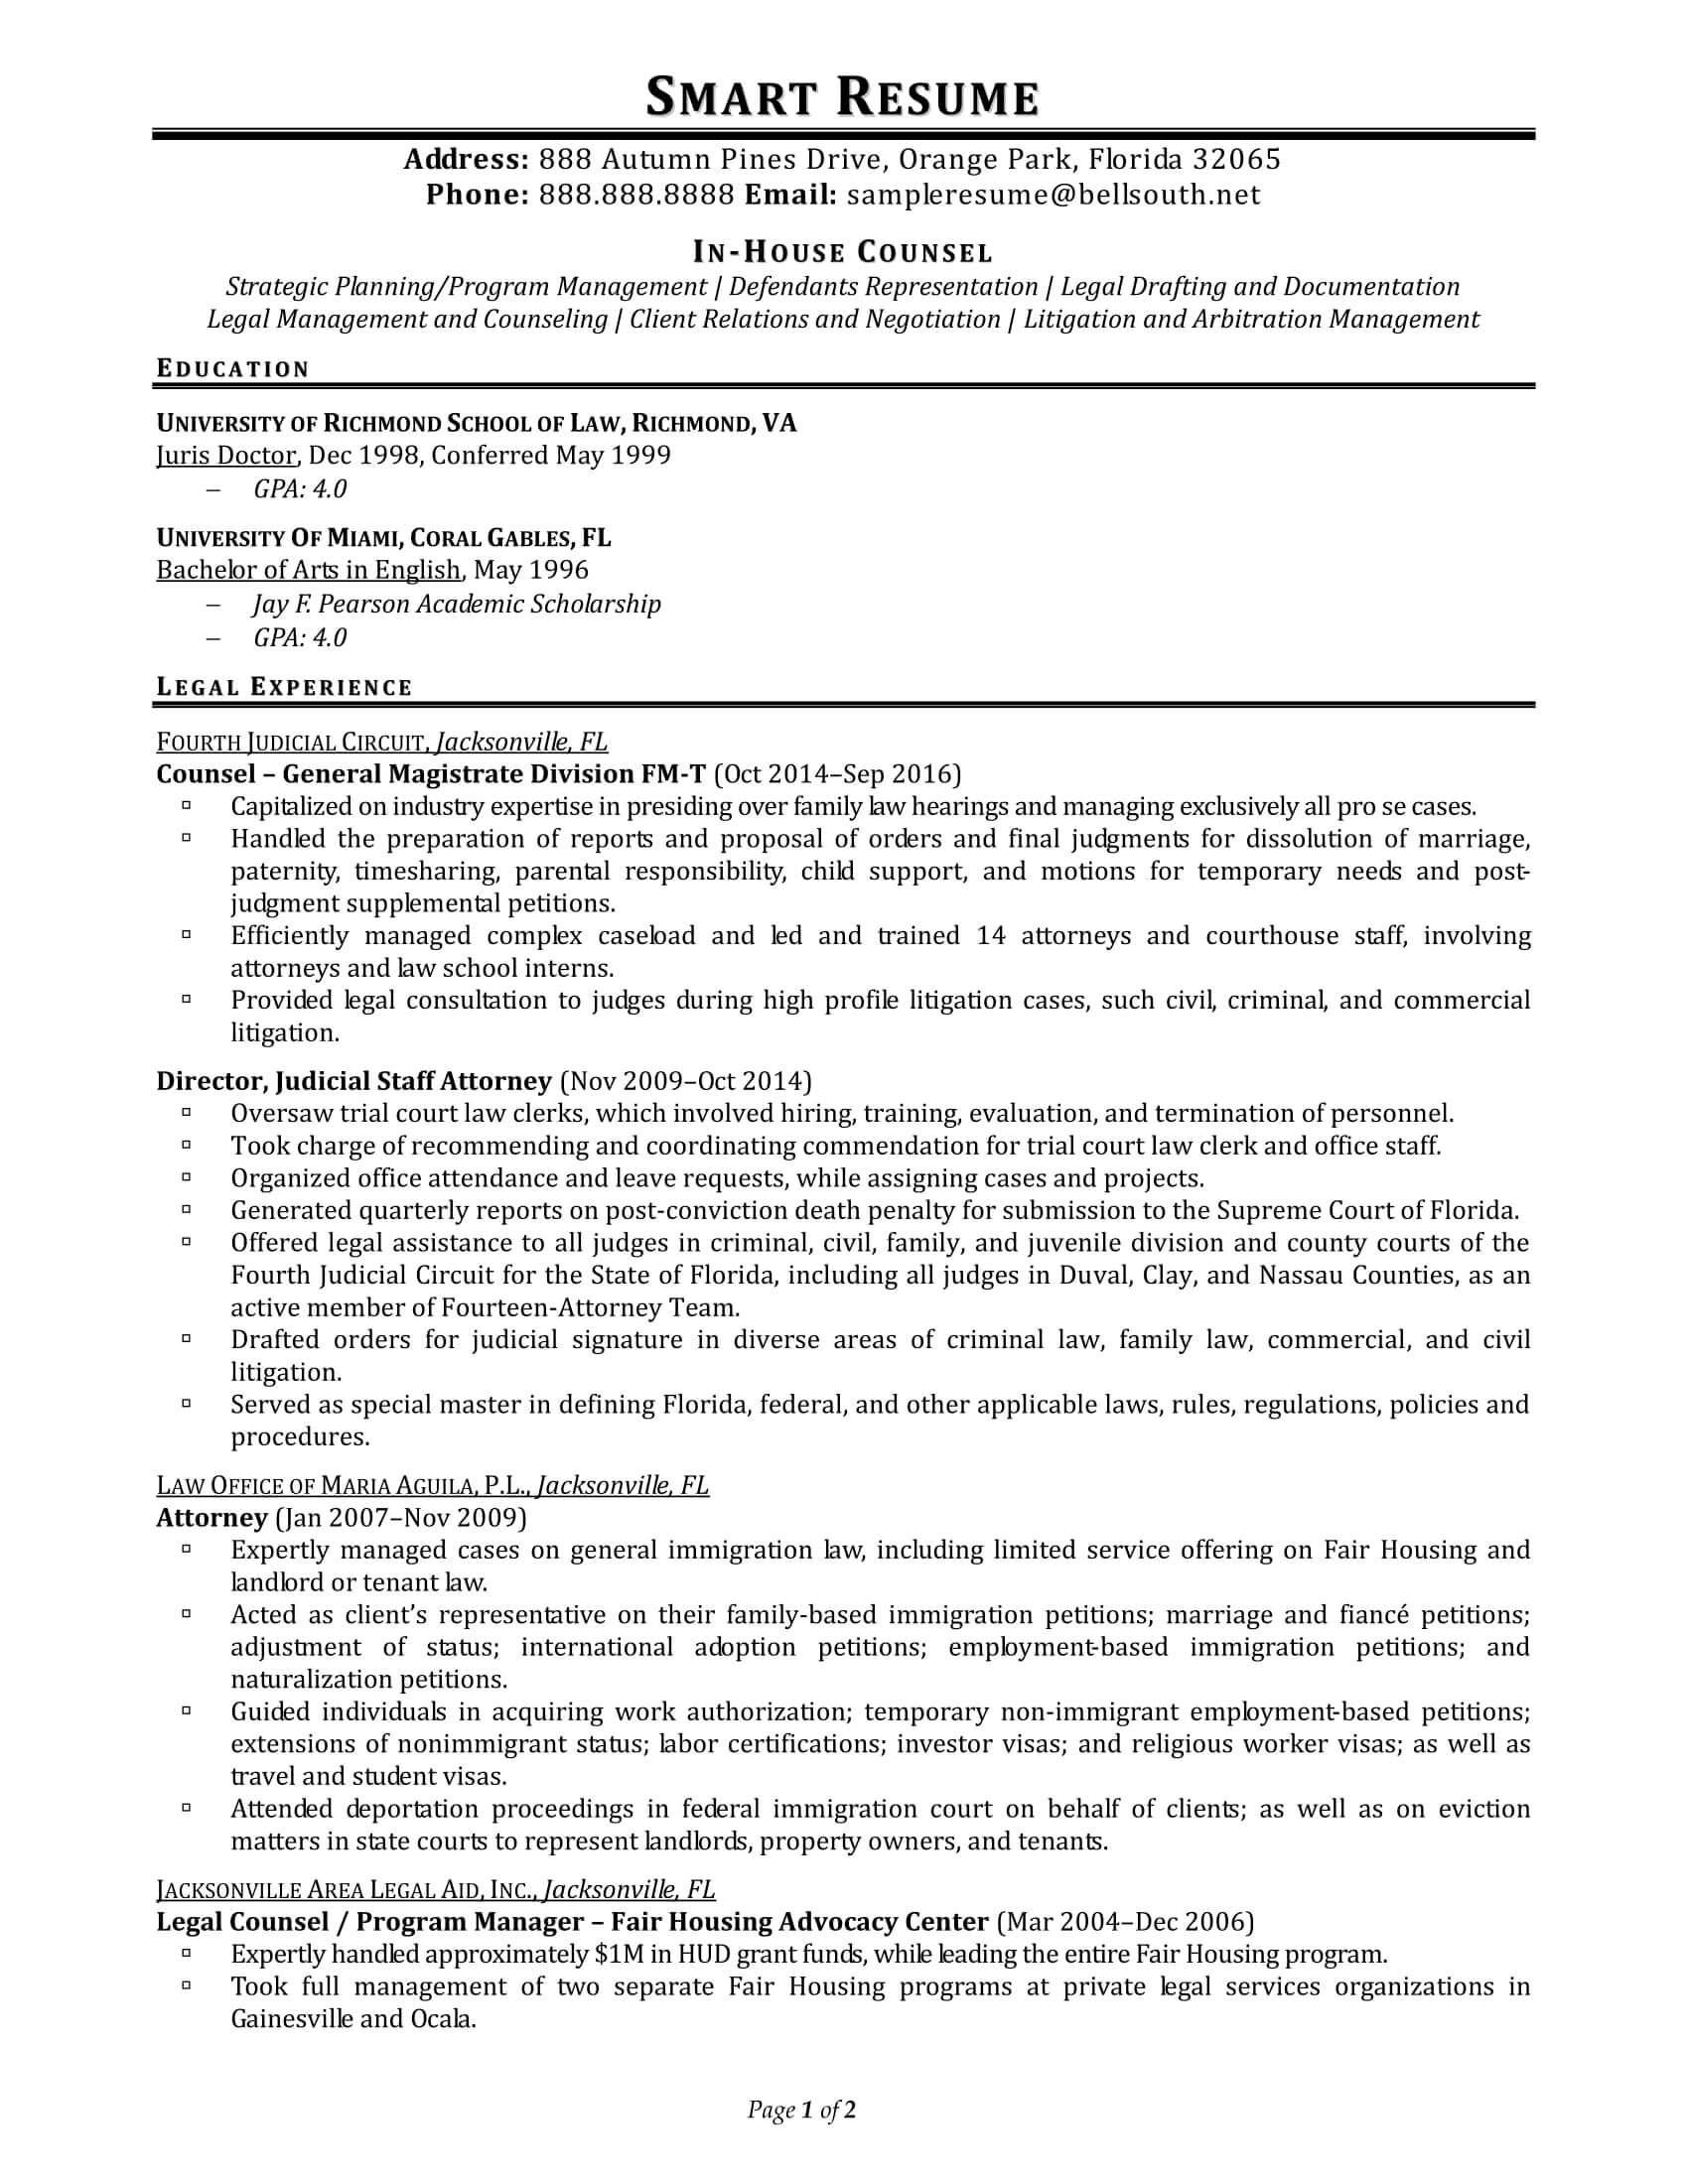 In-House Counsel Resume Sample